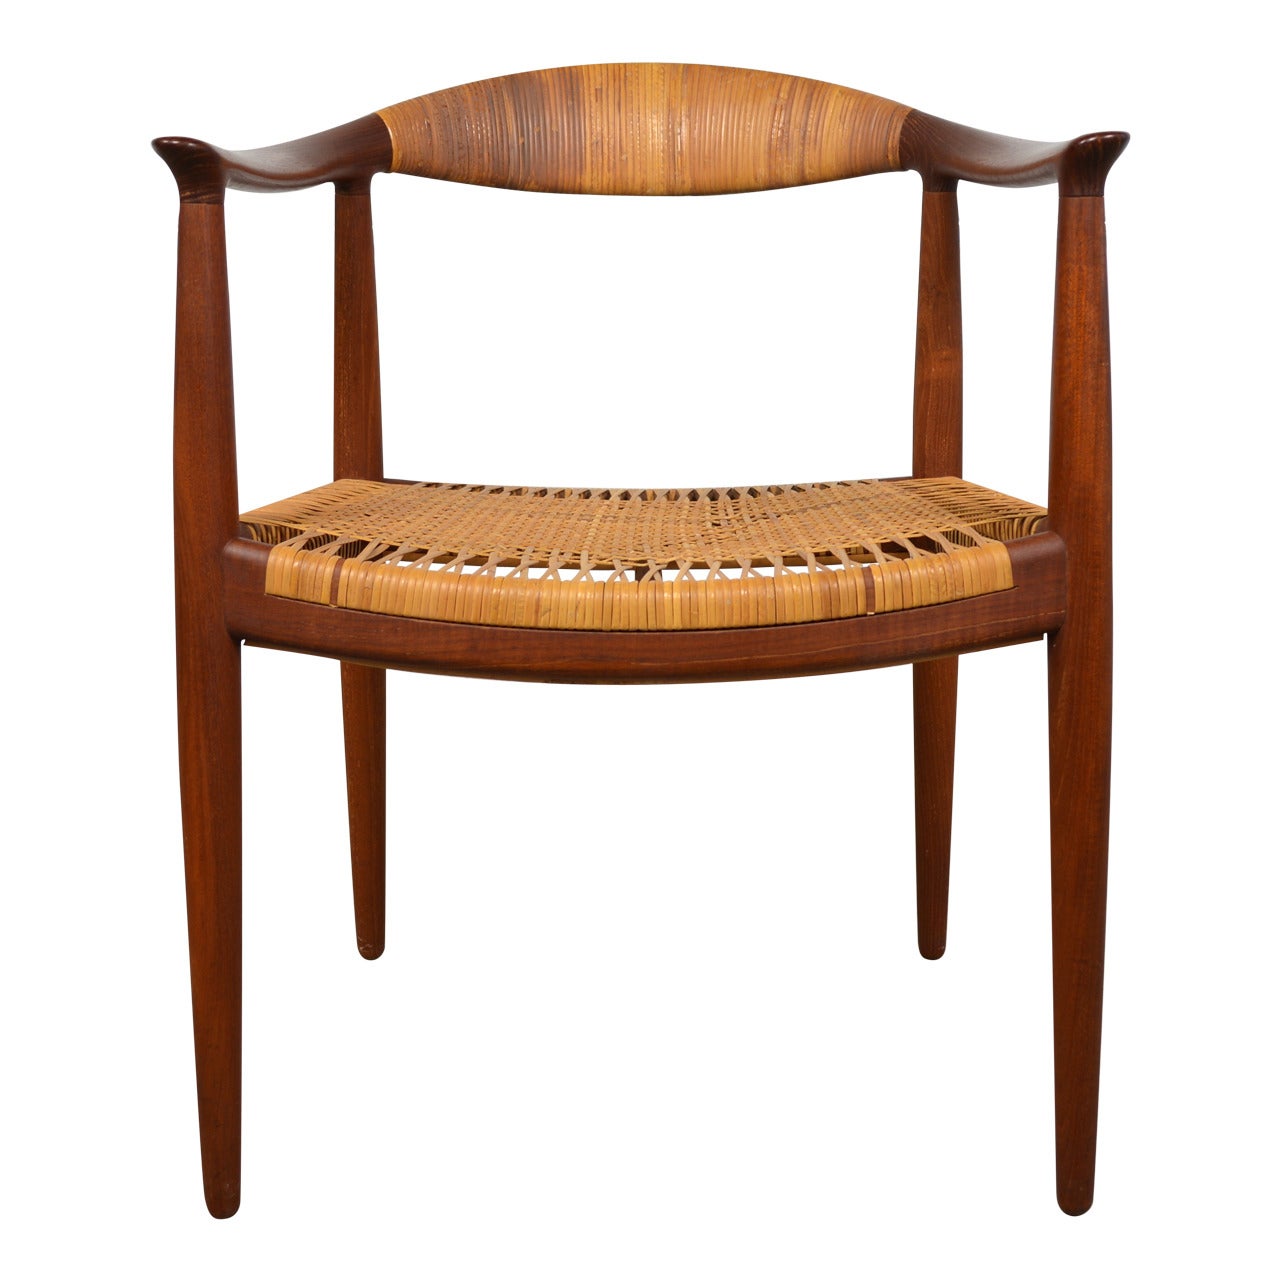 Hans Wegner "The Chair" in Teak and Cane